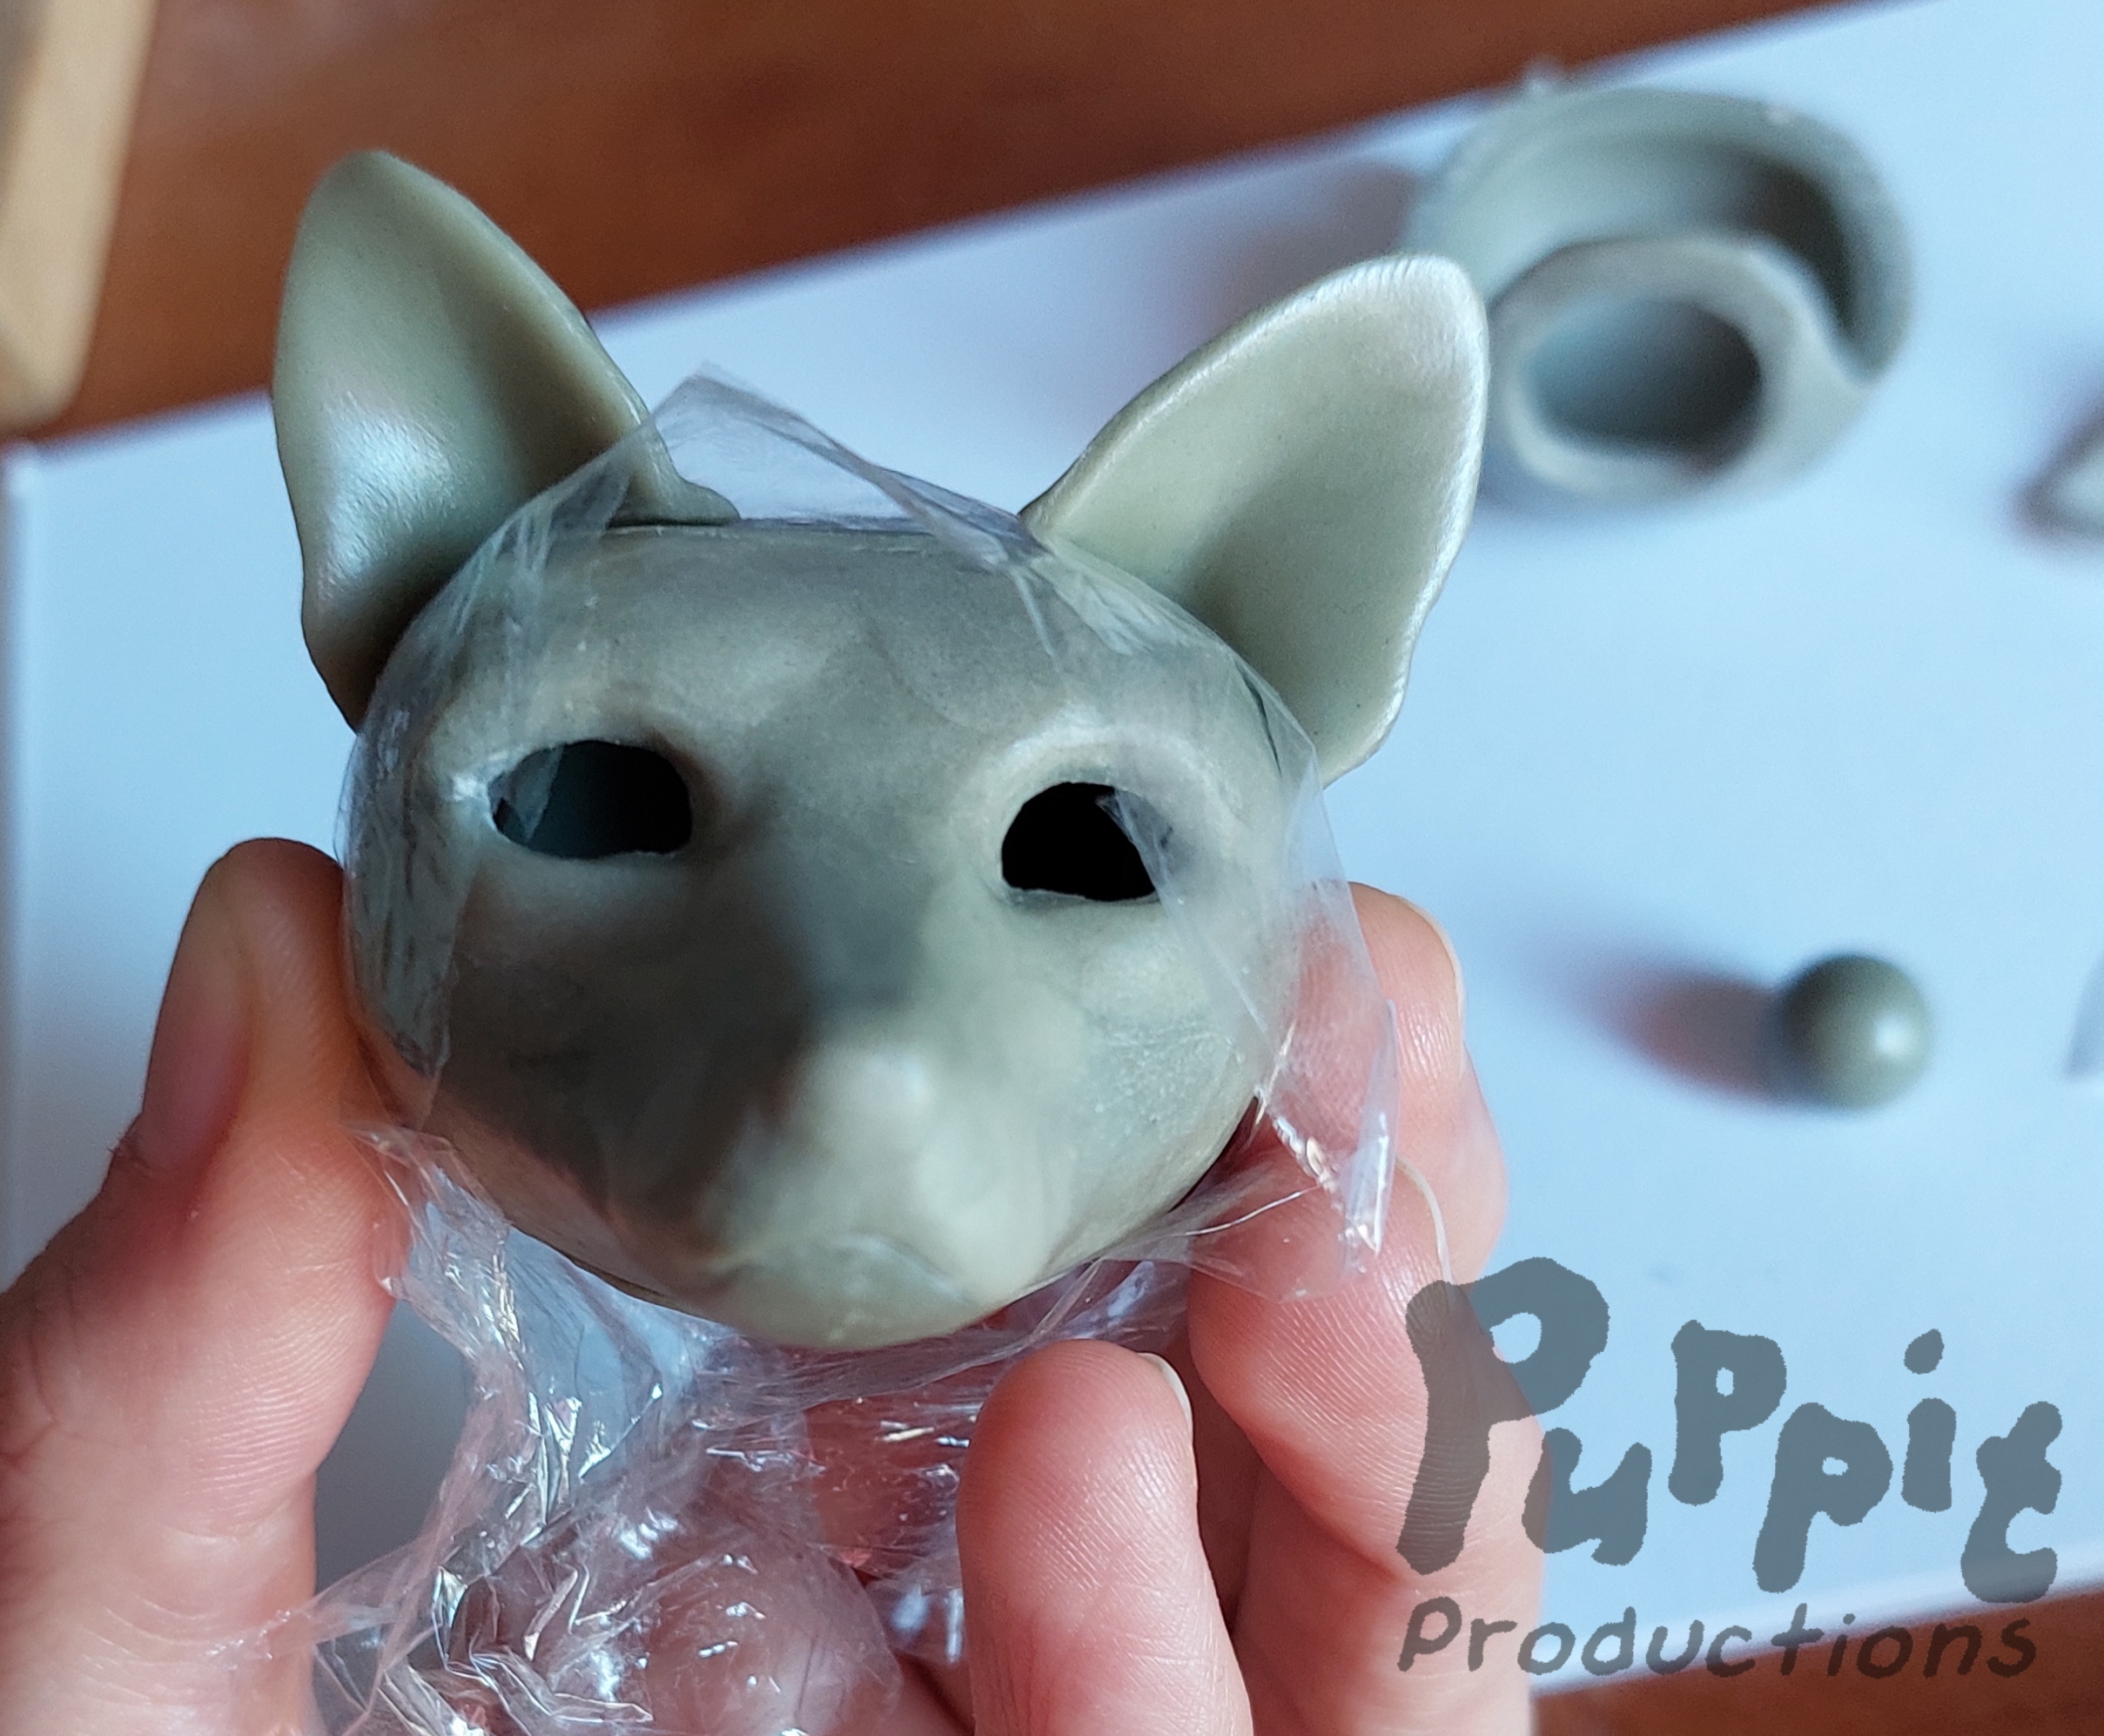 A picture of a red wolf head for a doll in rough gray clay finish, viewed from straight ahead. It does not have any eyes yet and between the ears and around the back of the head cellofane wrap is visible.